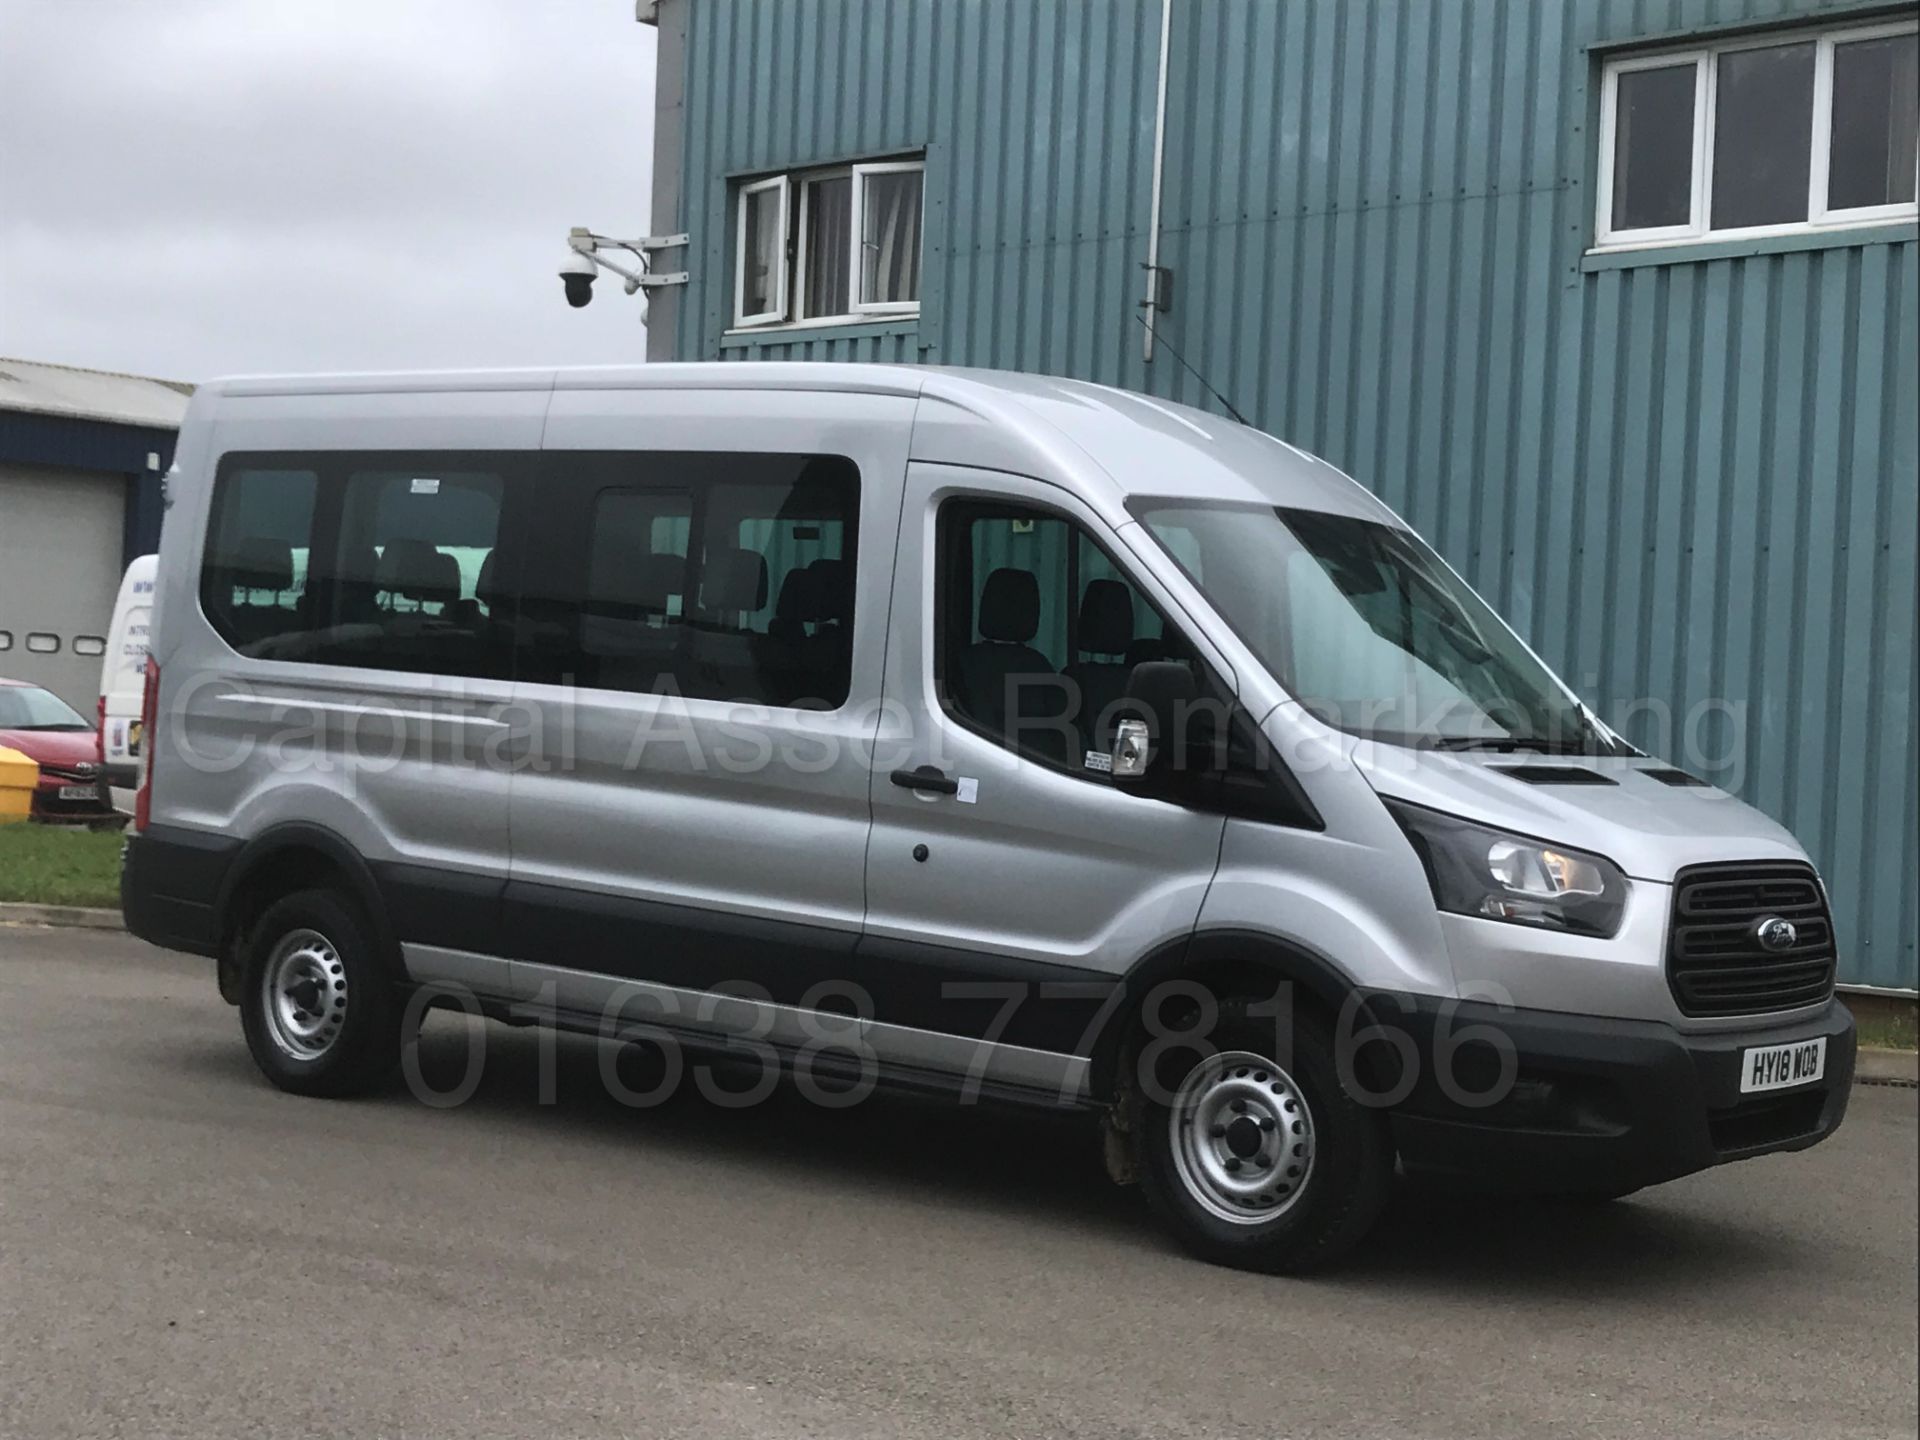 (On Sale) FORD TRANSIT LWB '15 SEATER MINI-BUS' (2018) '2.2 TDCI -125 BHP- 6 SPEED' 130 MILES ONLY ! - Image 16 of 50